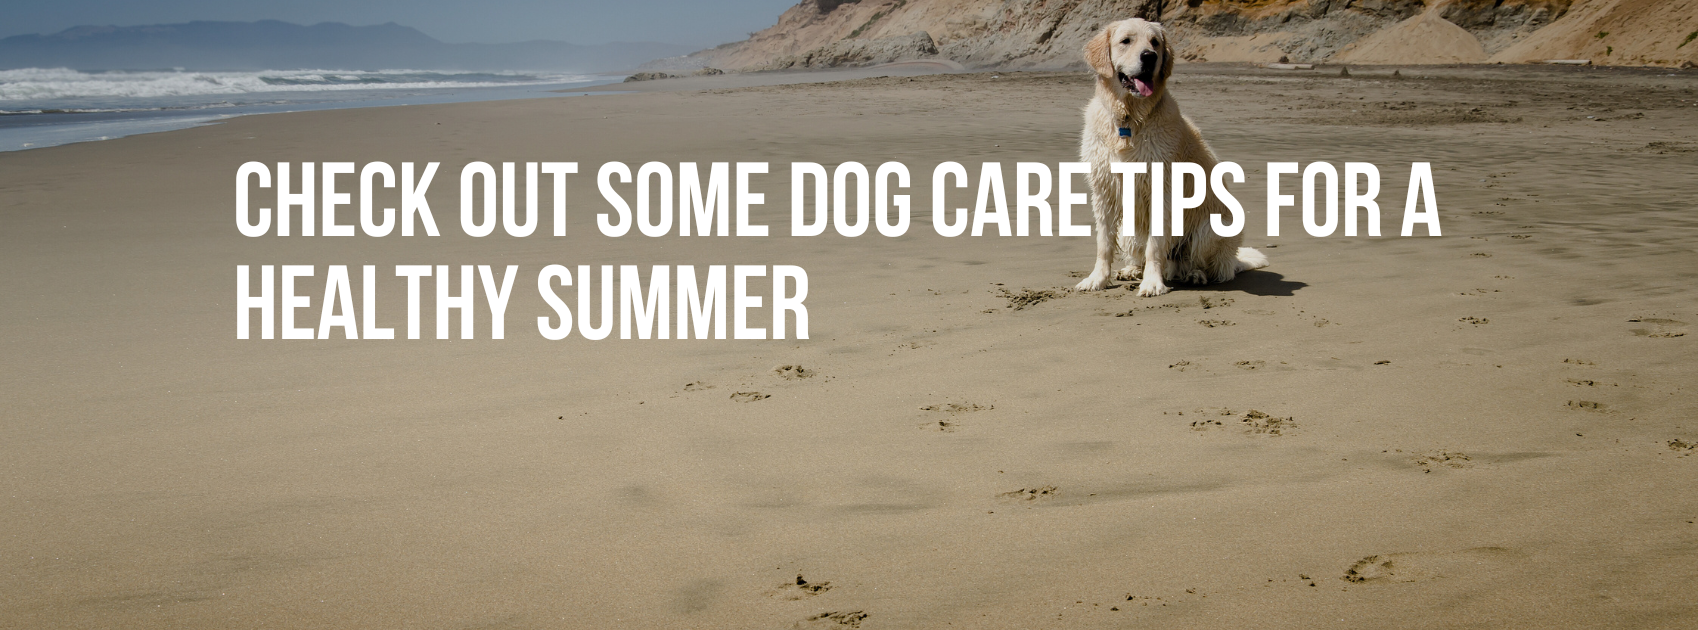 CHECK OUT SOME DOG CARE TIPS FOR A HEALTHY SUMMER